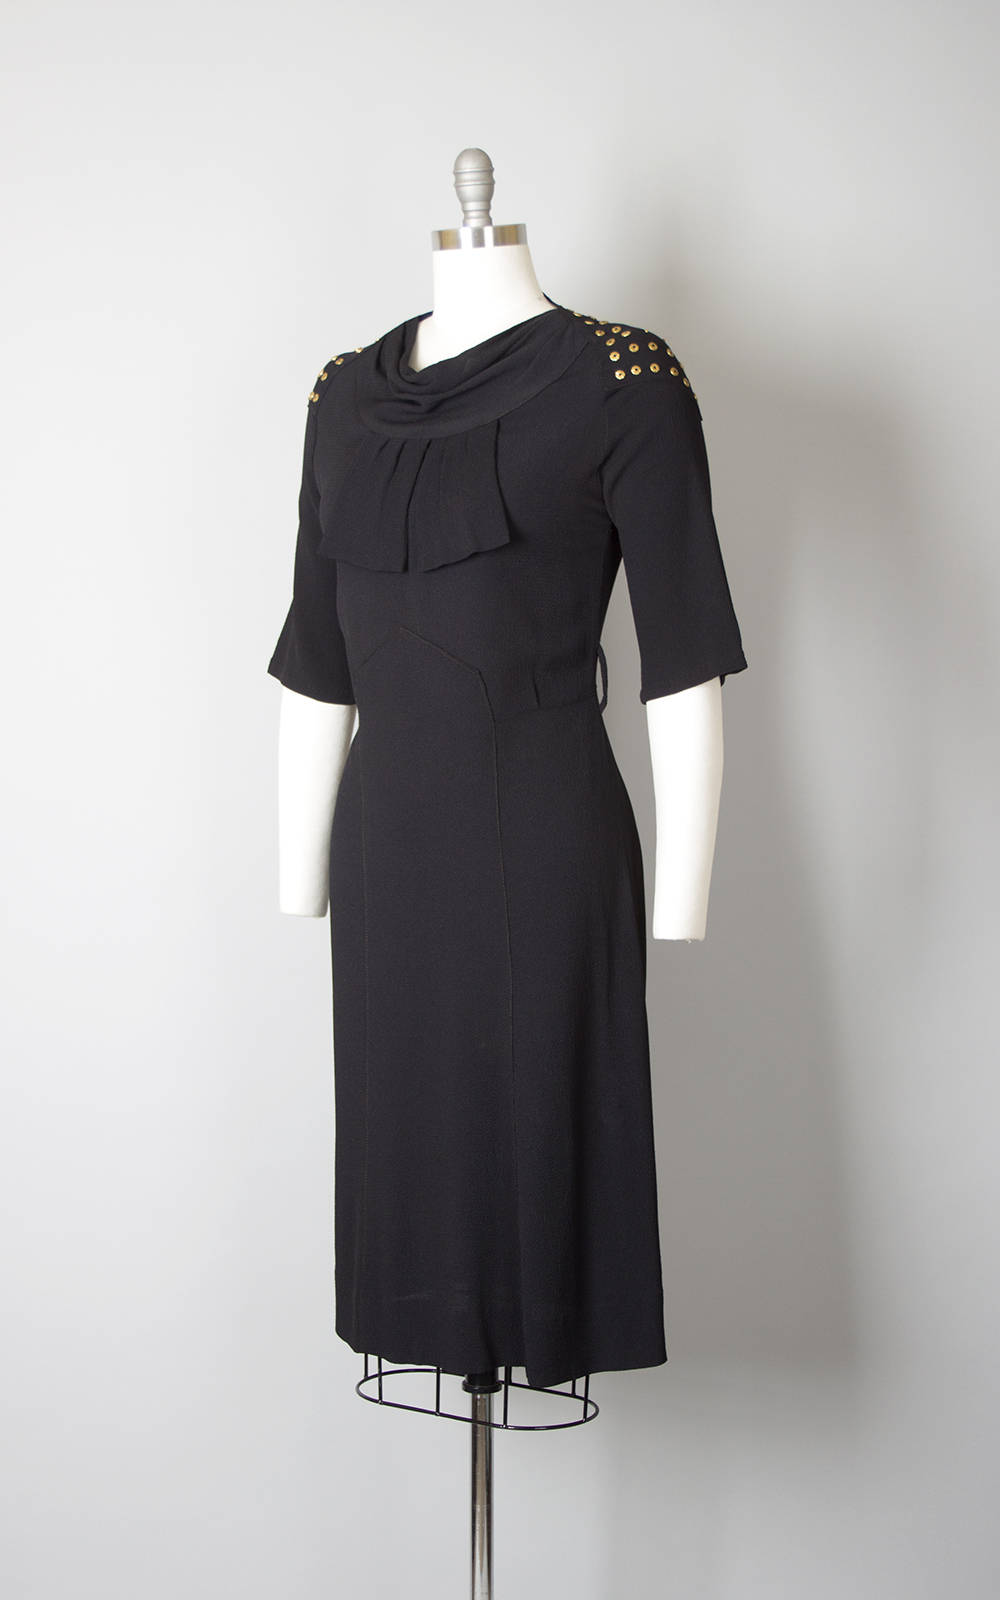 Vintage 1930s Dress | 30s Studded Black Rayon Crepe Evening Cocktail Wiggle Dress (small)